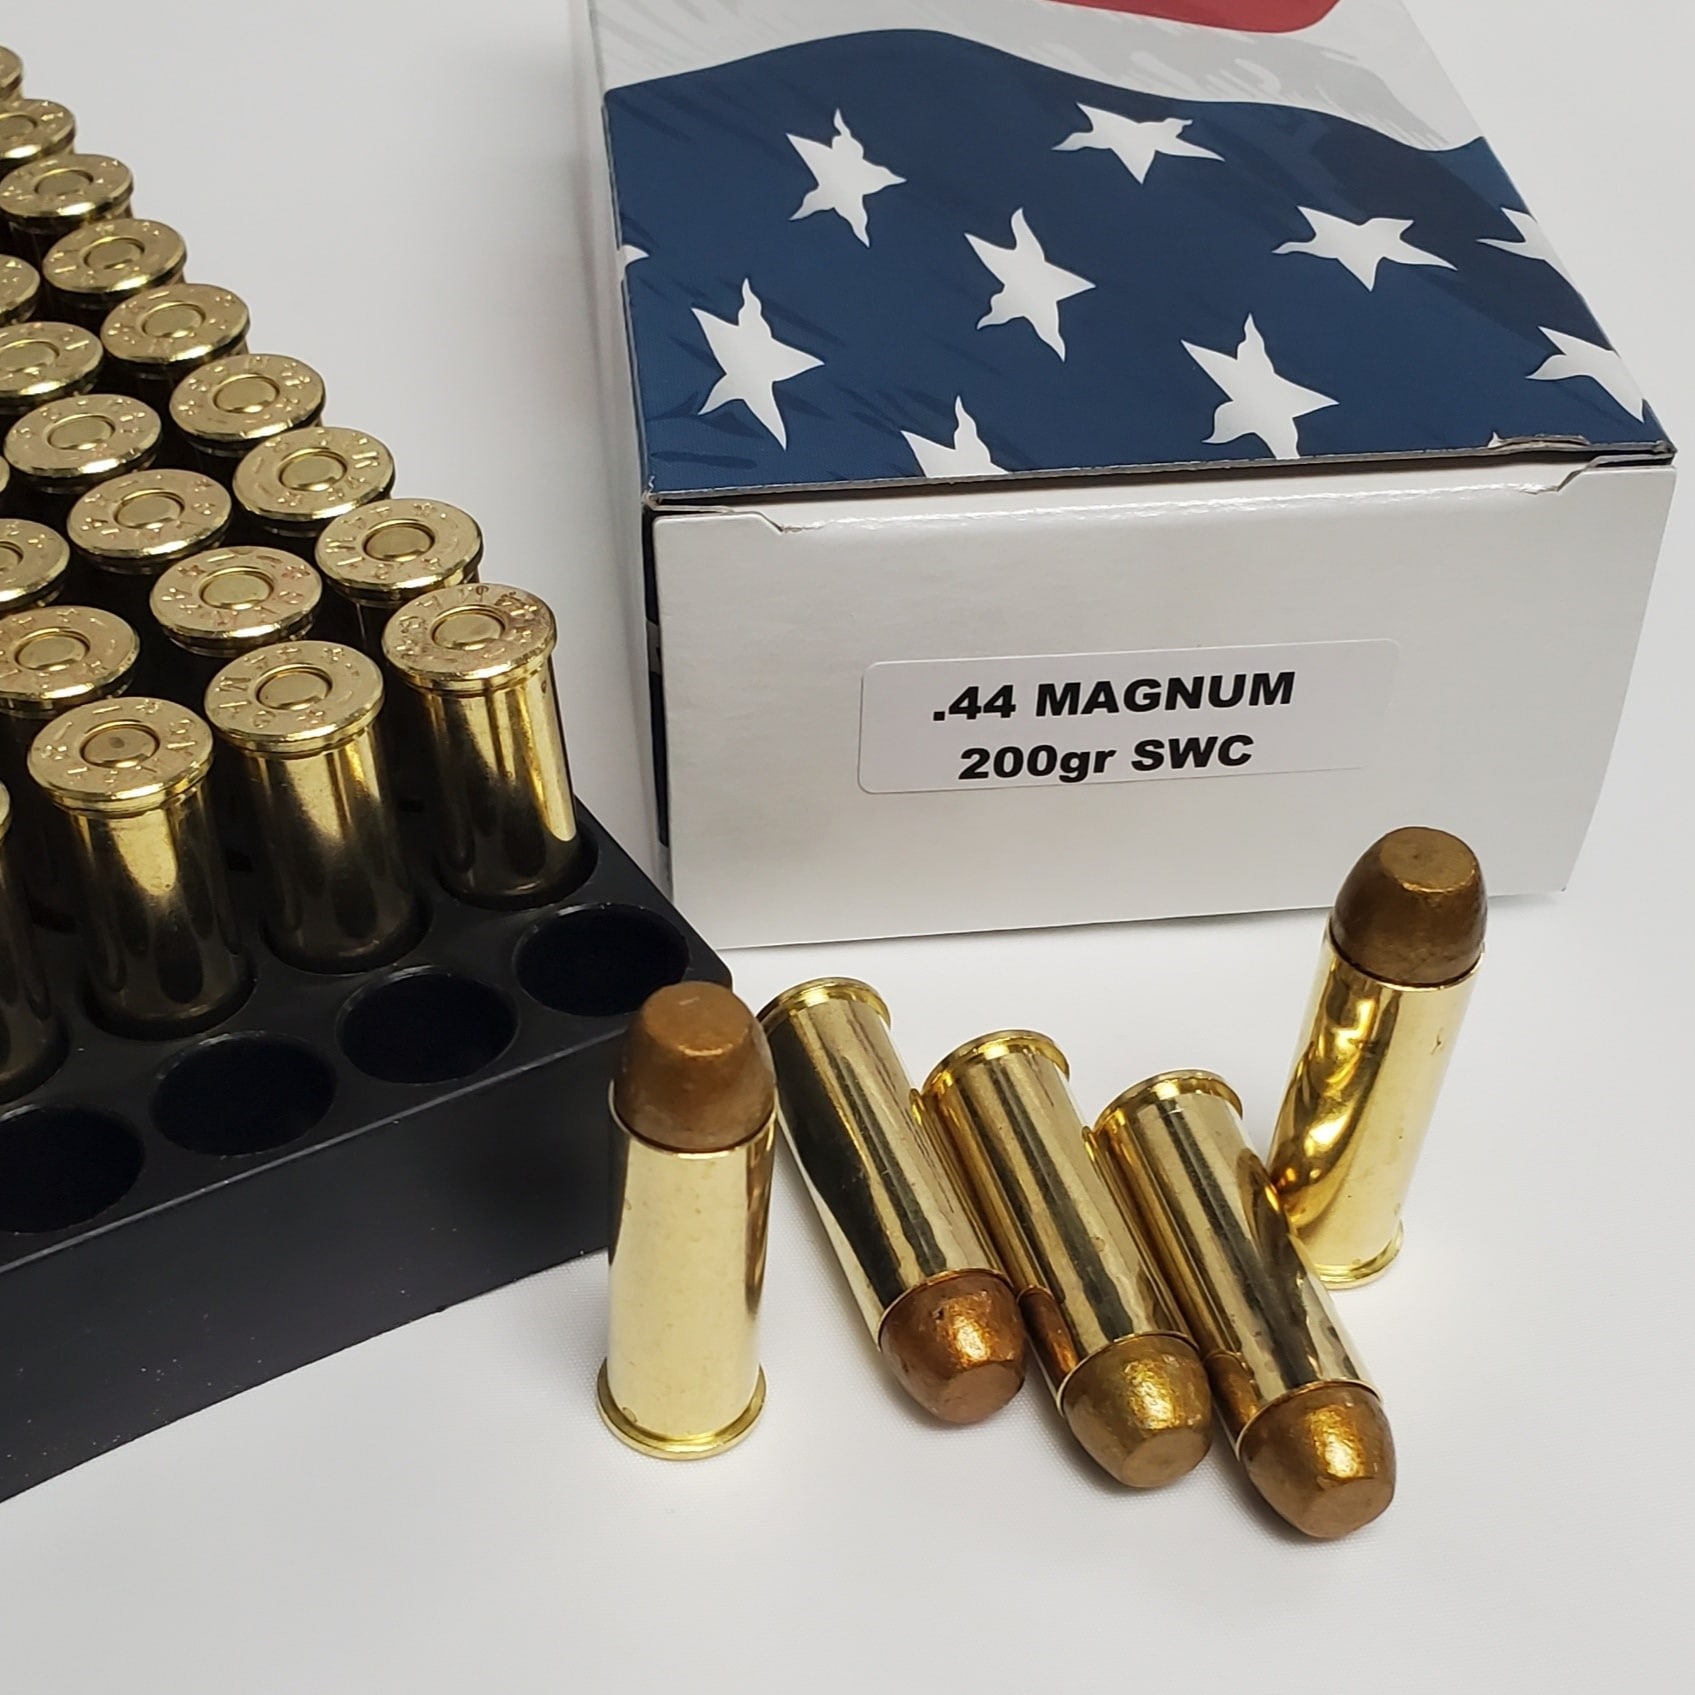 Magnum RNFP Brass PerfectCowboy Action Made Veteran Owned Company Ammo